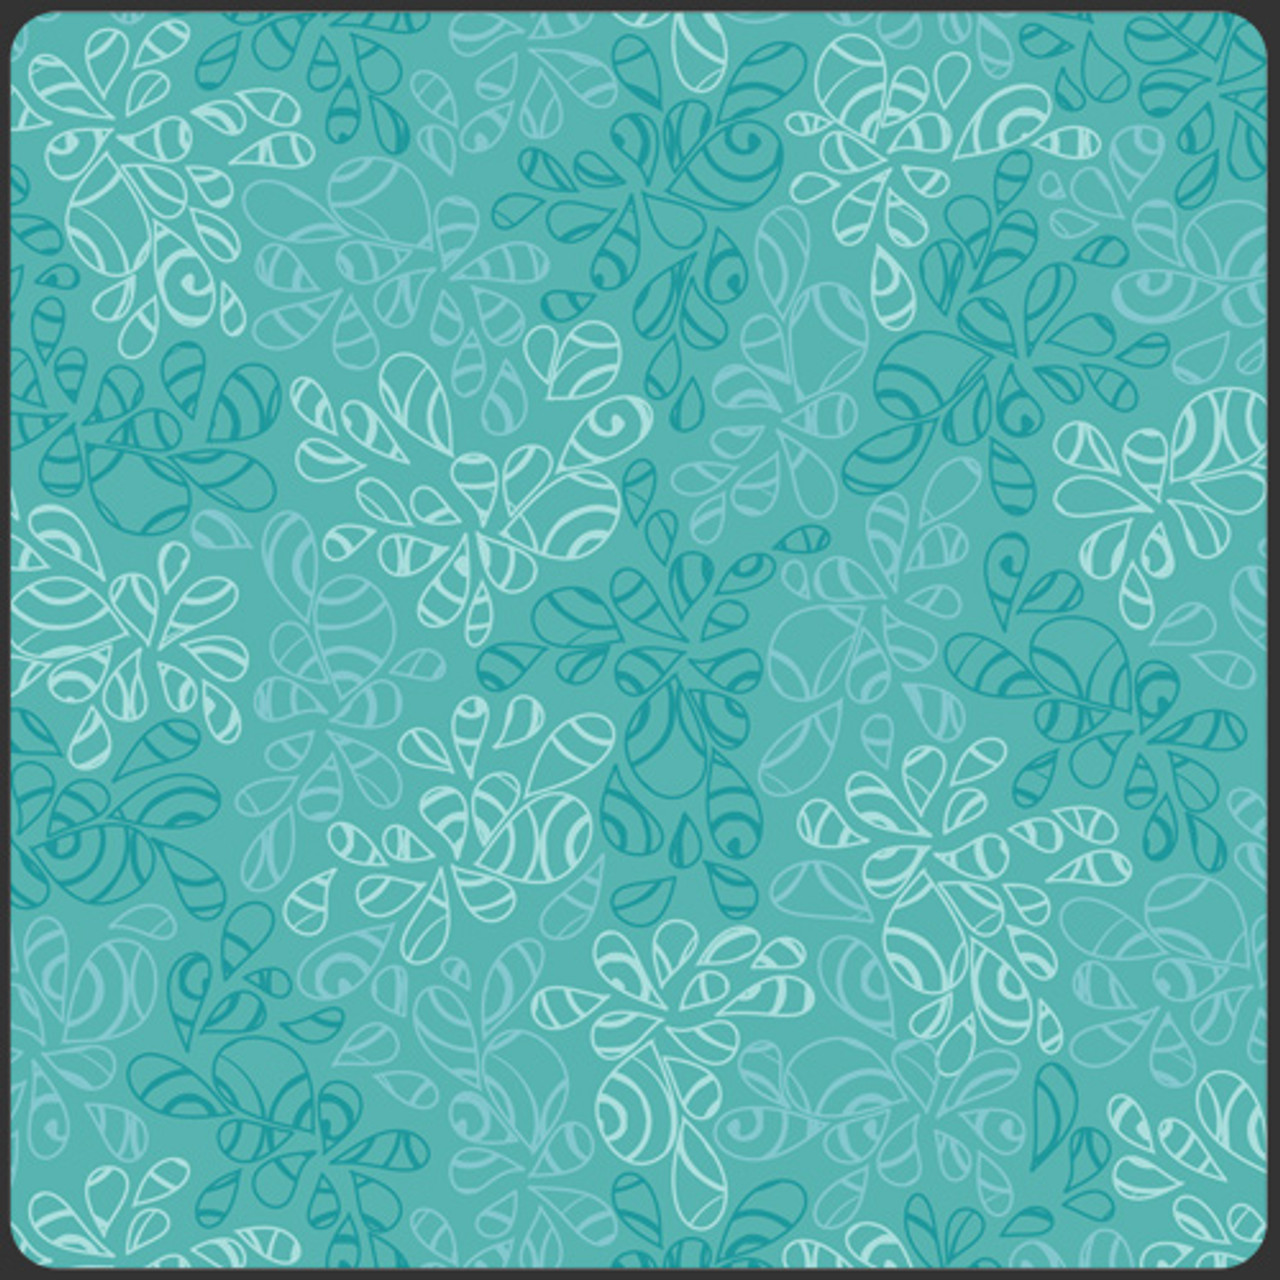 AGF Fabric Nature Ocean Breeze, By-the-yard.